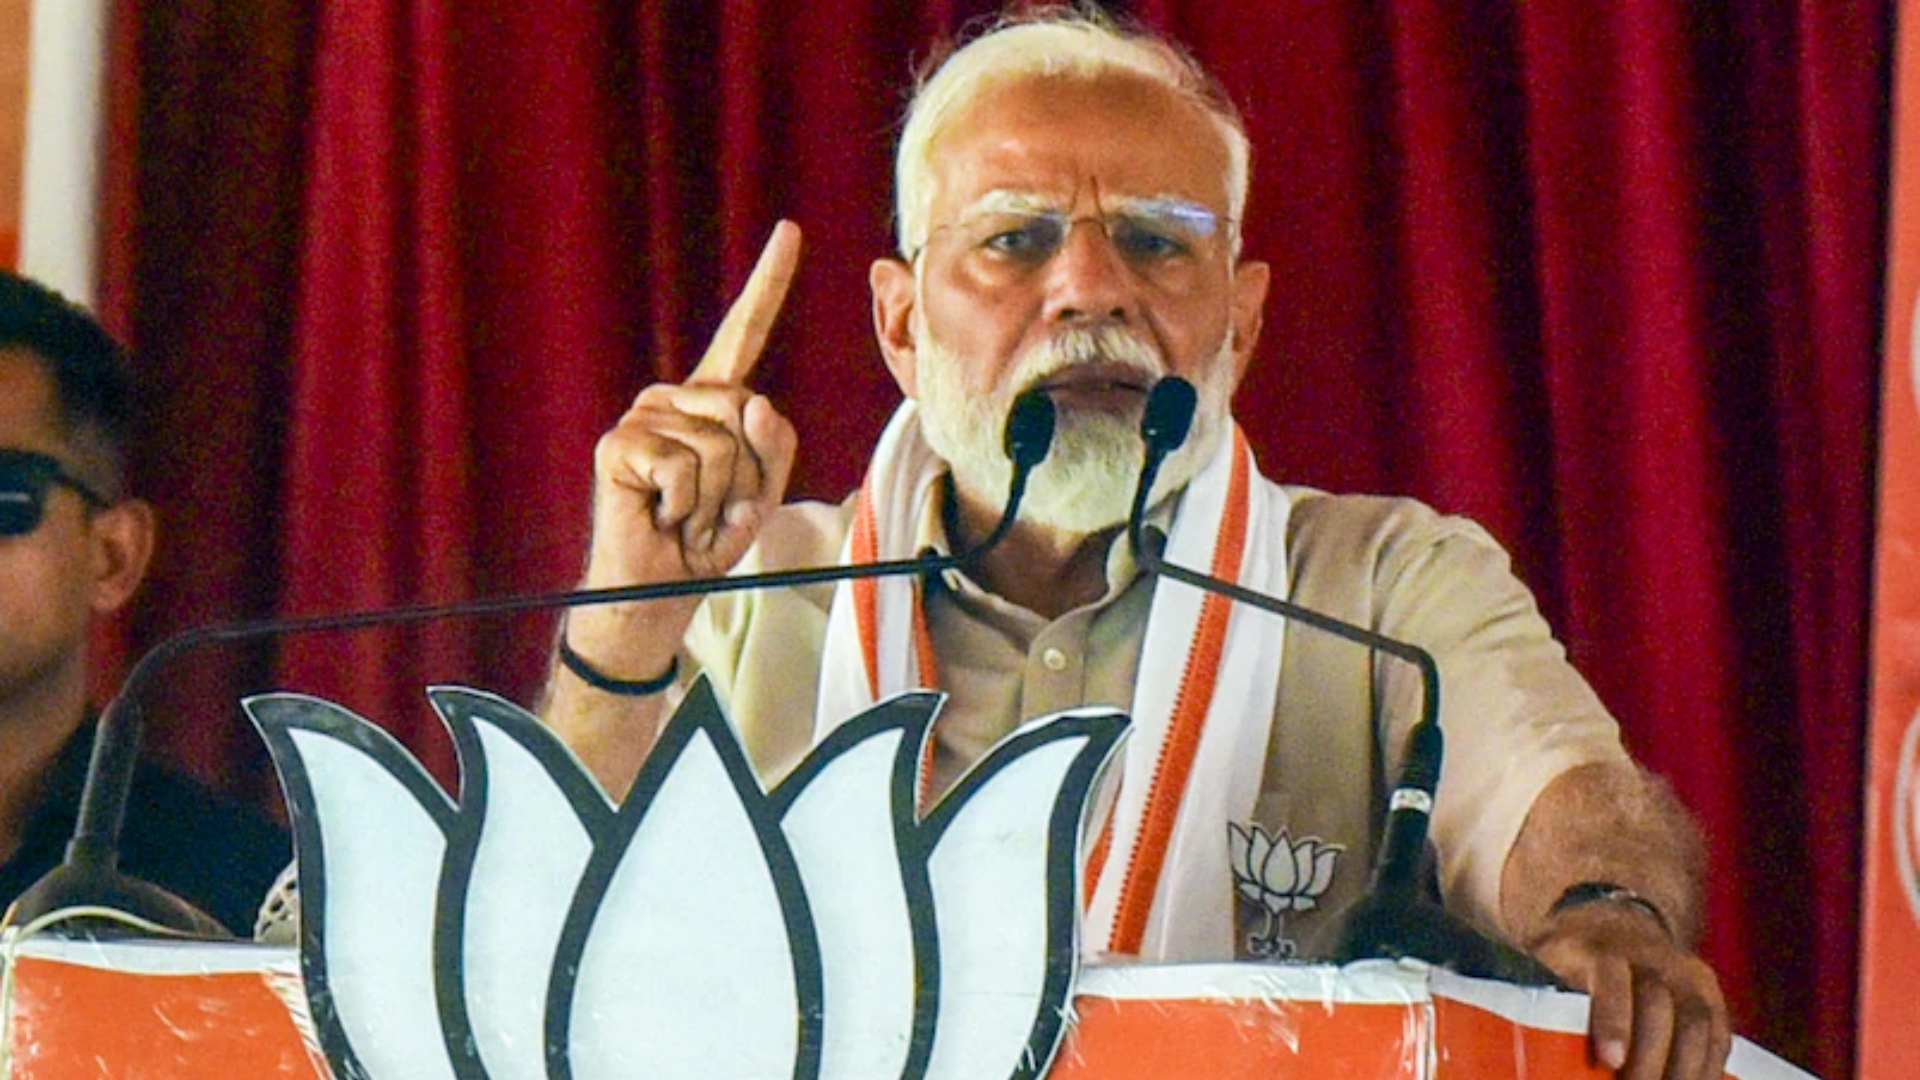 Prime Minister Narendra Modi to Address Election Rallies in Chhattisgarh and Rajasthan Today